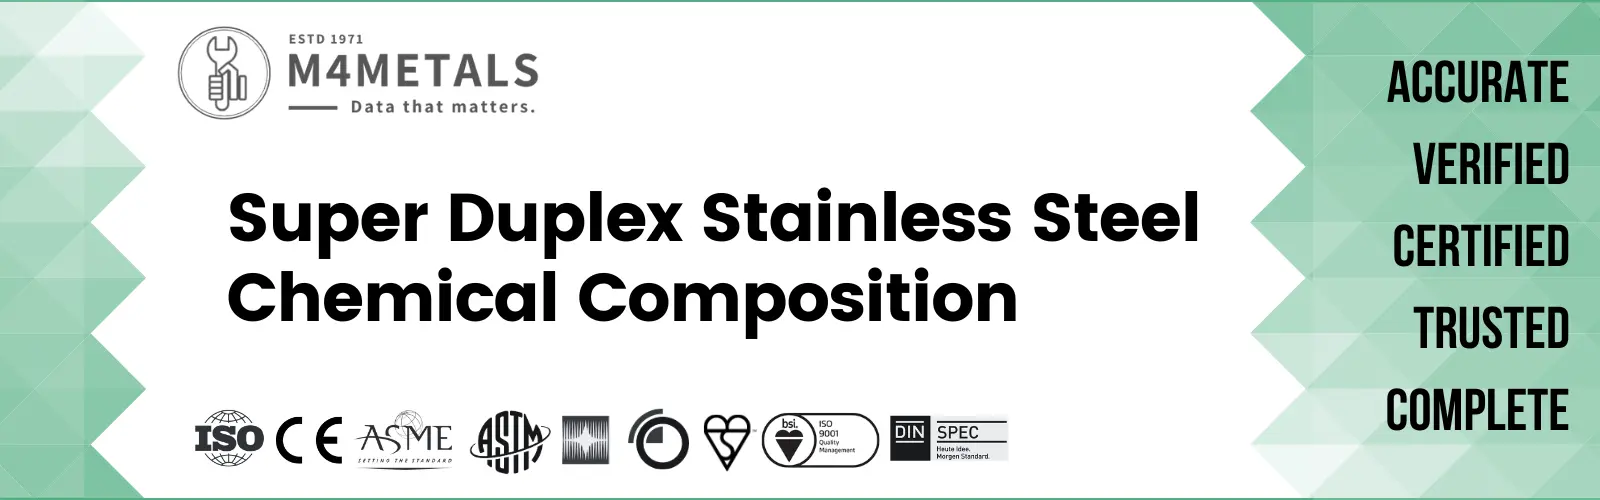 Super Duplex Stainless Steel  Chemical Composition